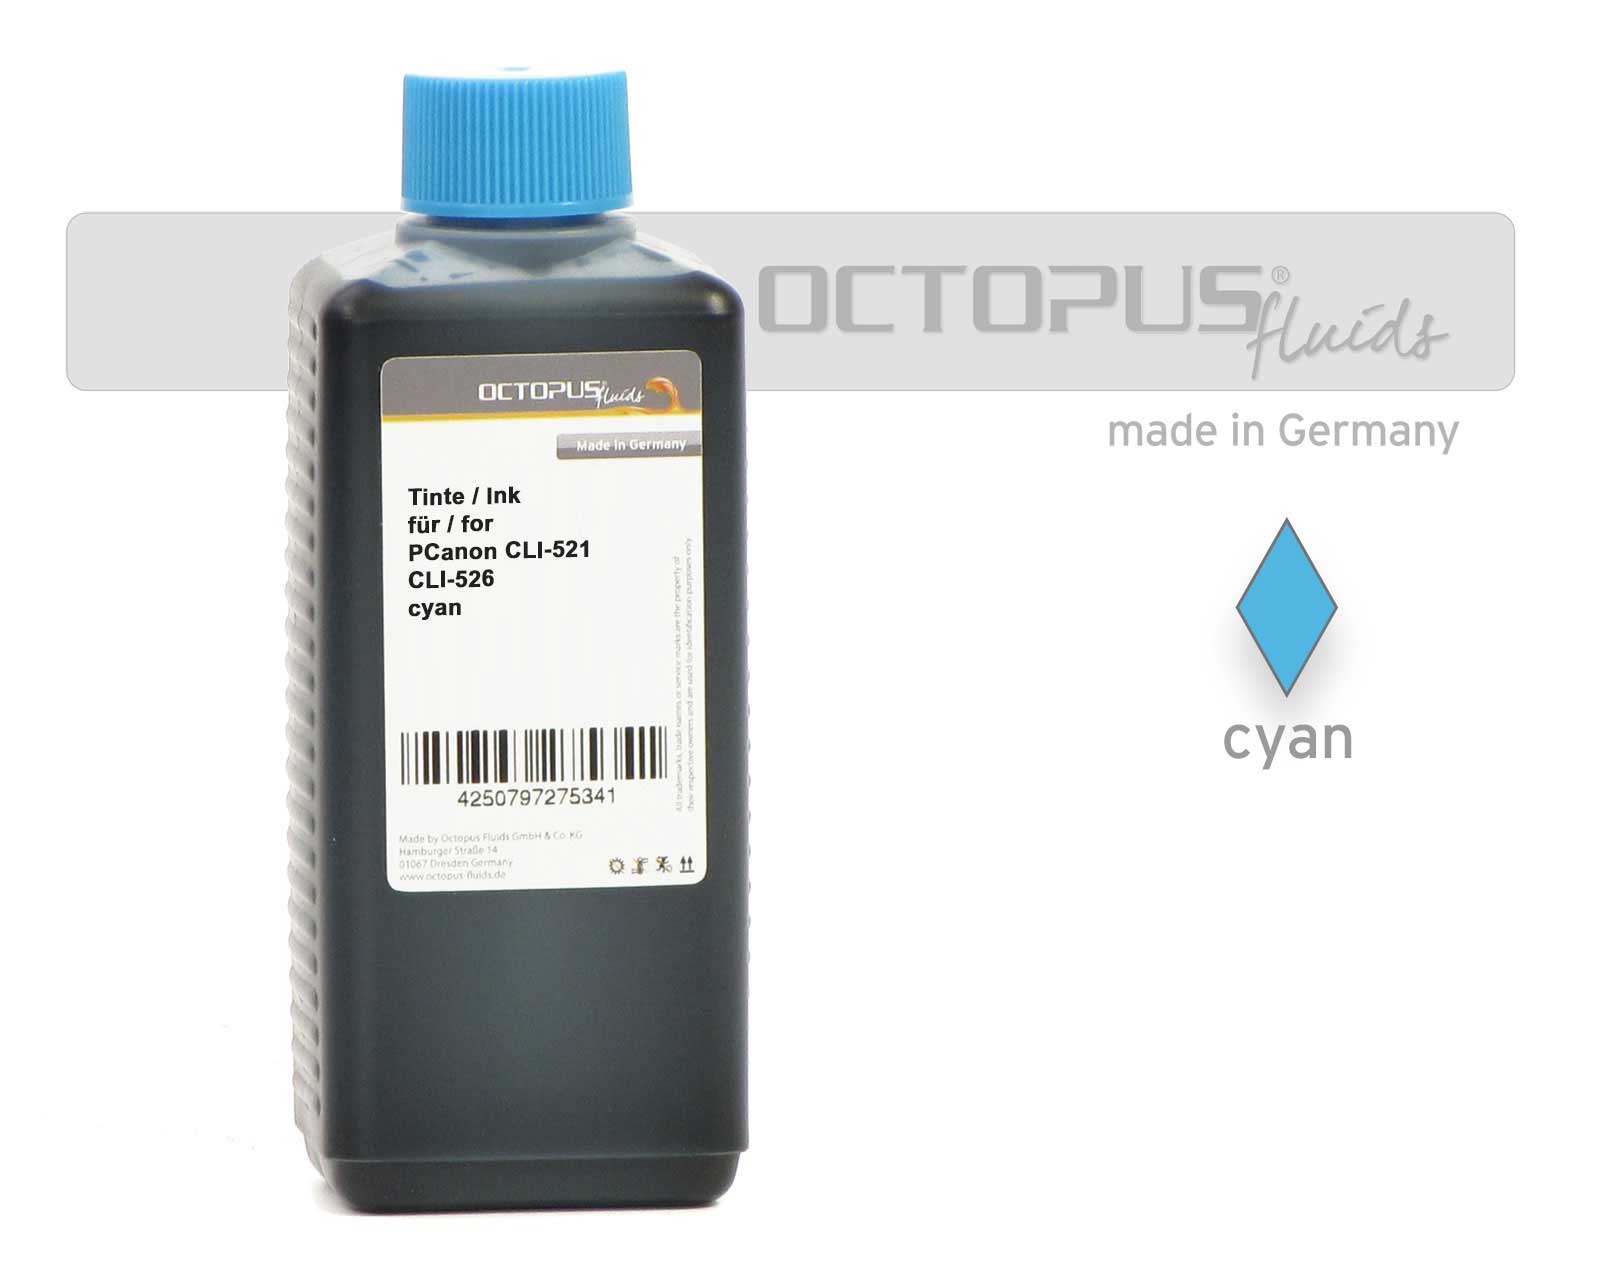 Octopus Ink for Canon CLI-521, CLI-526 cyan